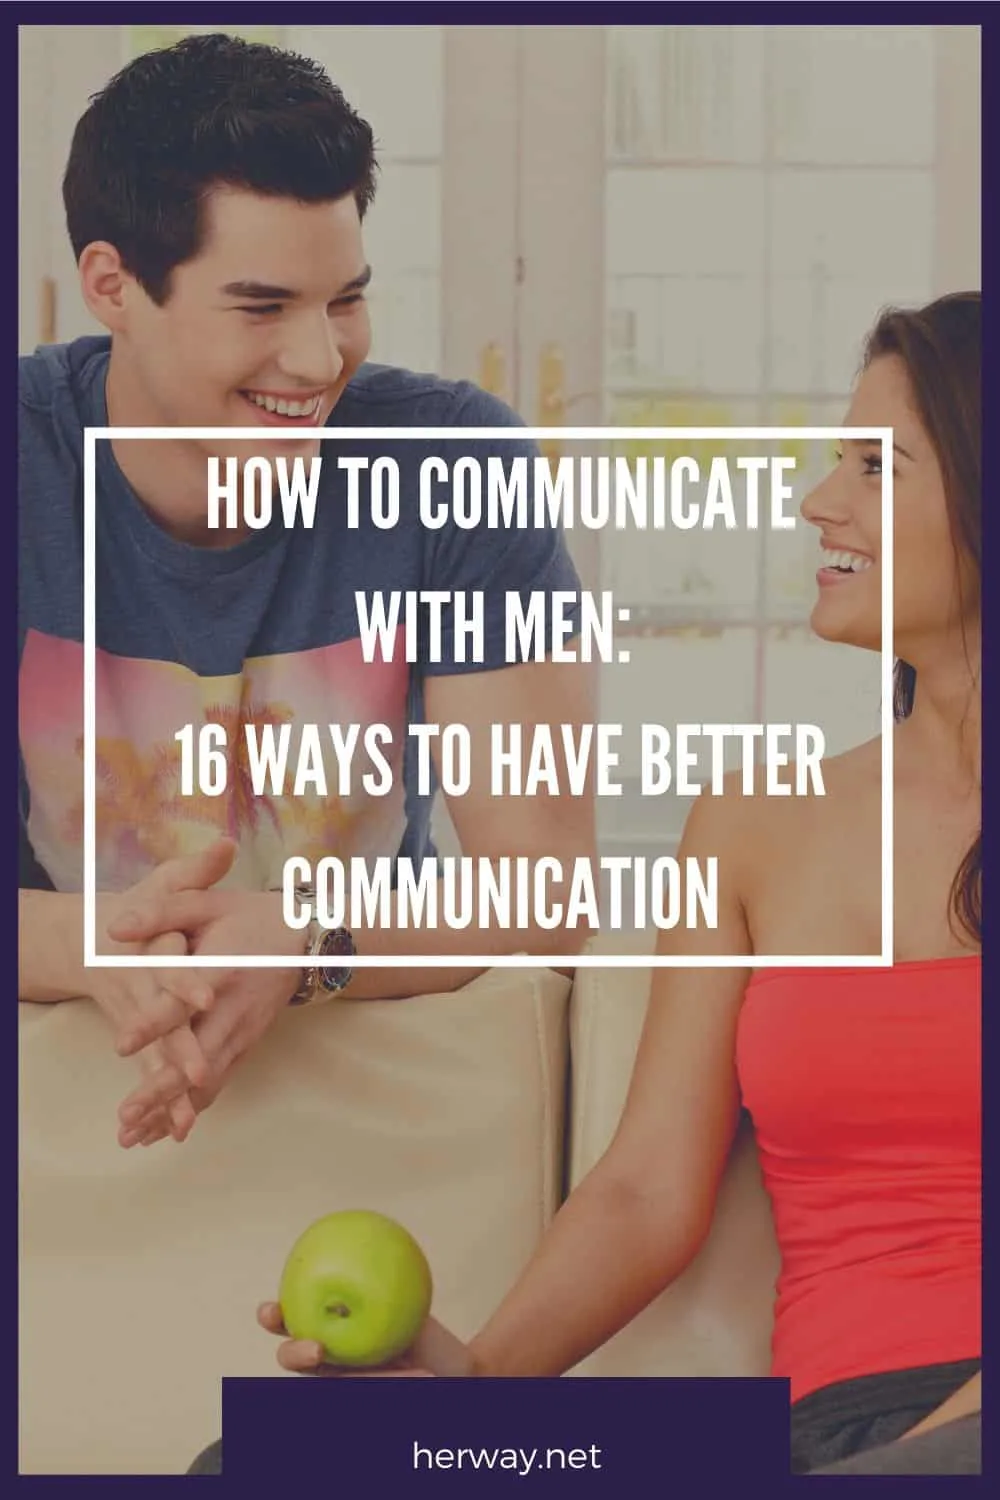 How To Communicate With Men: 16 Ways To Have Better Communication